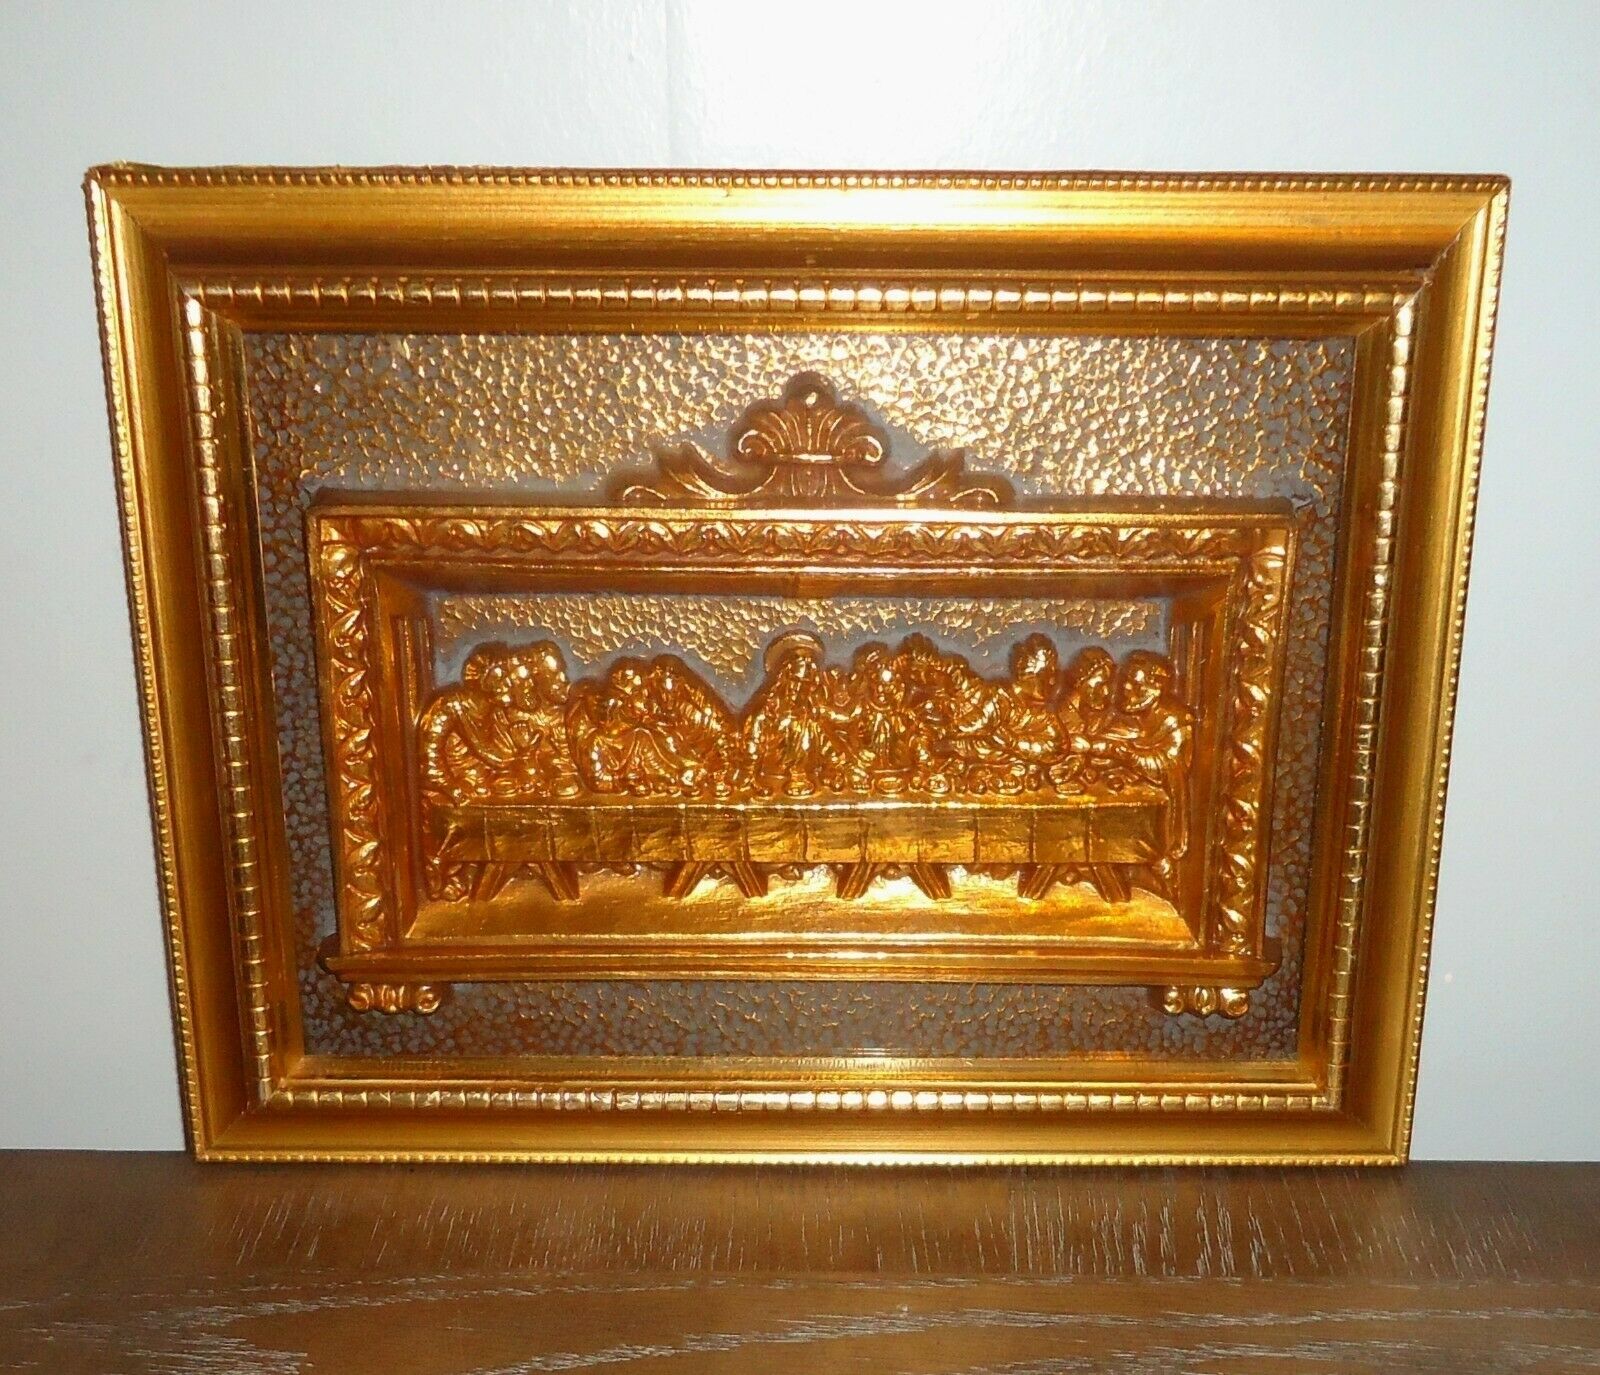 Vintage The Last Supper Framed Ornate Gold Raised Relief Wall Art Hanging 3d Tmc